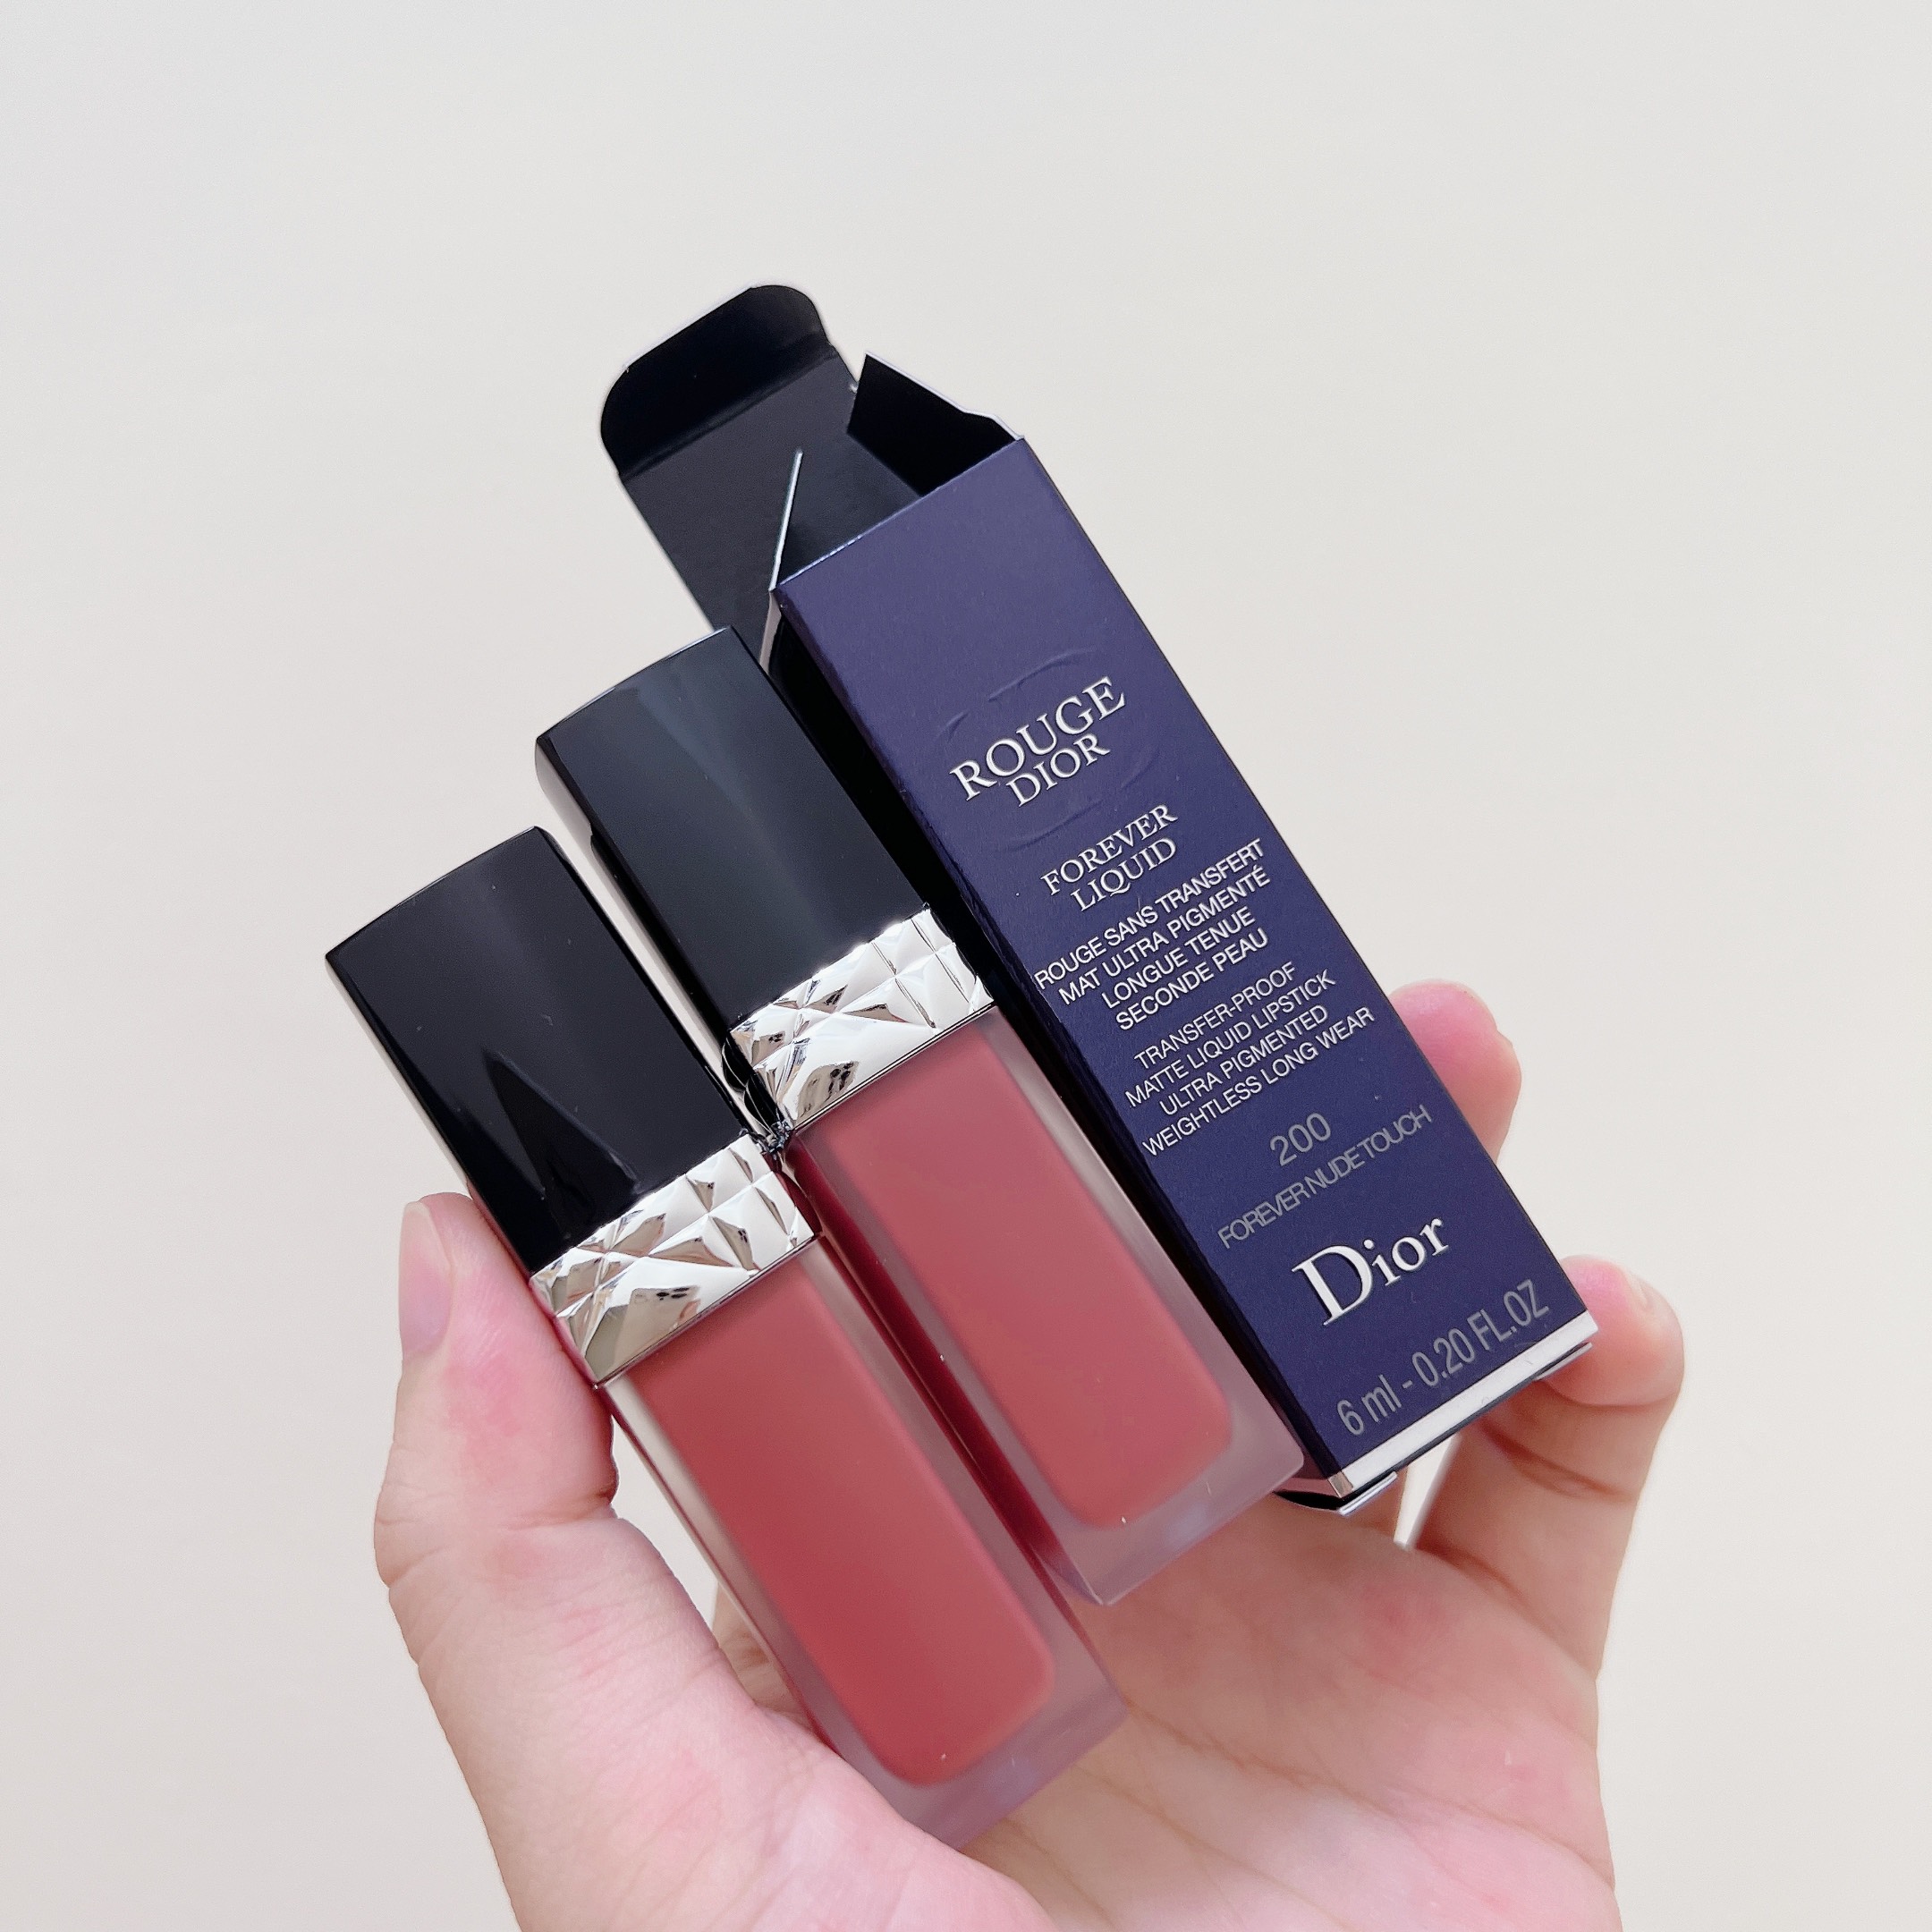 Son Kem Dior Rouge Forever Liquid 200 Forever Nude Touch  Màu Hồng Cam Đất   KYOVN